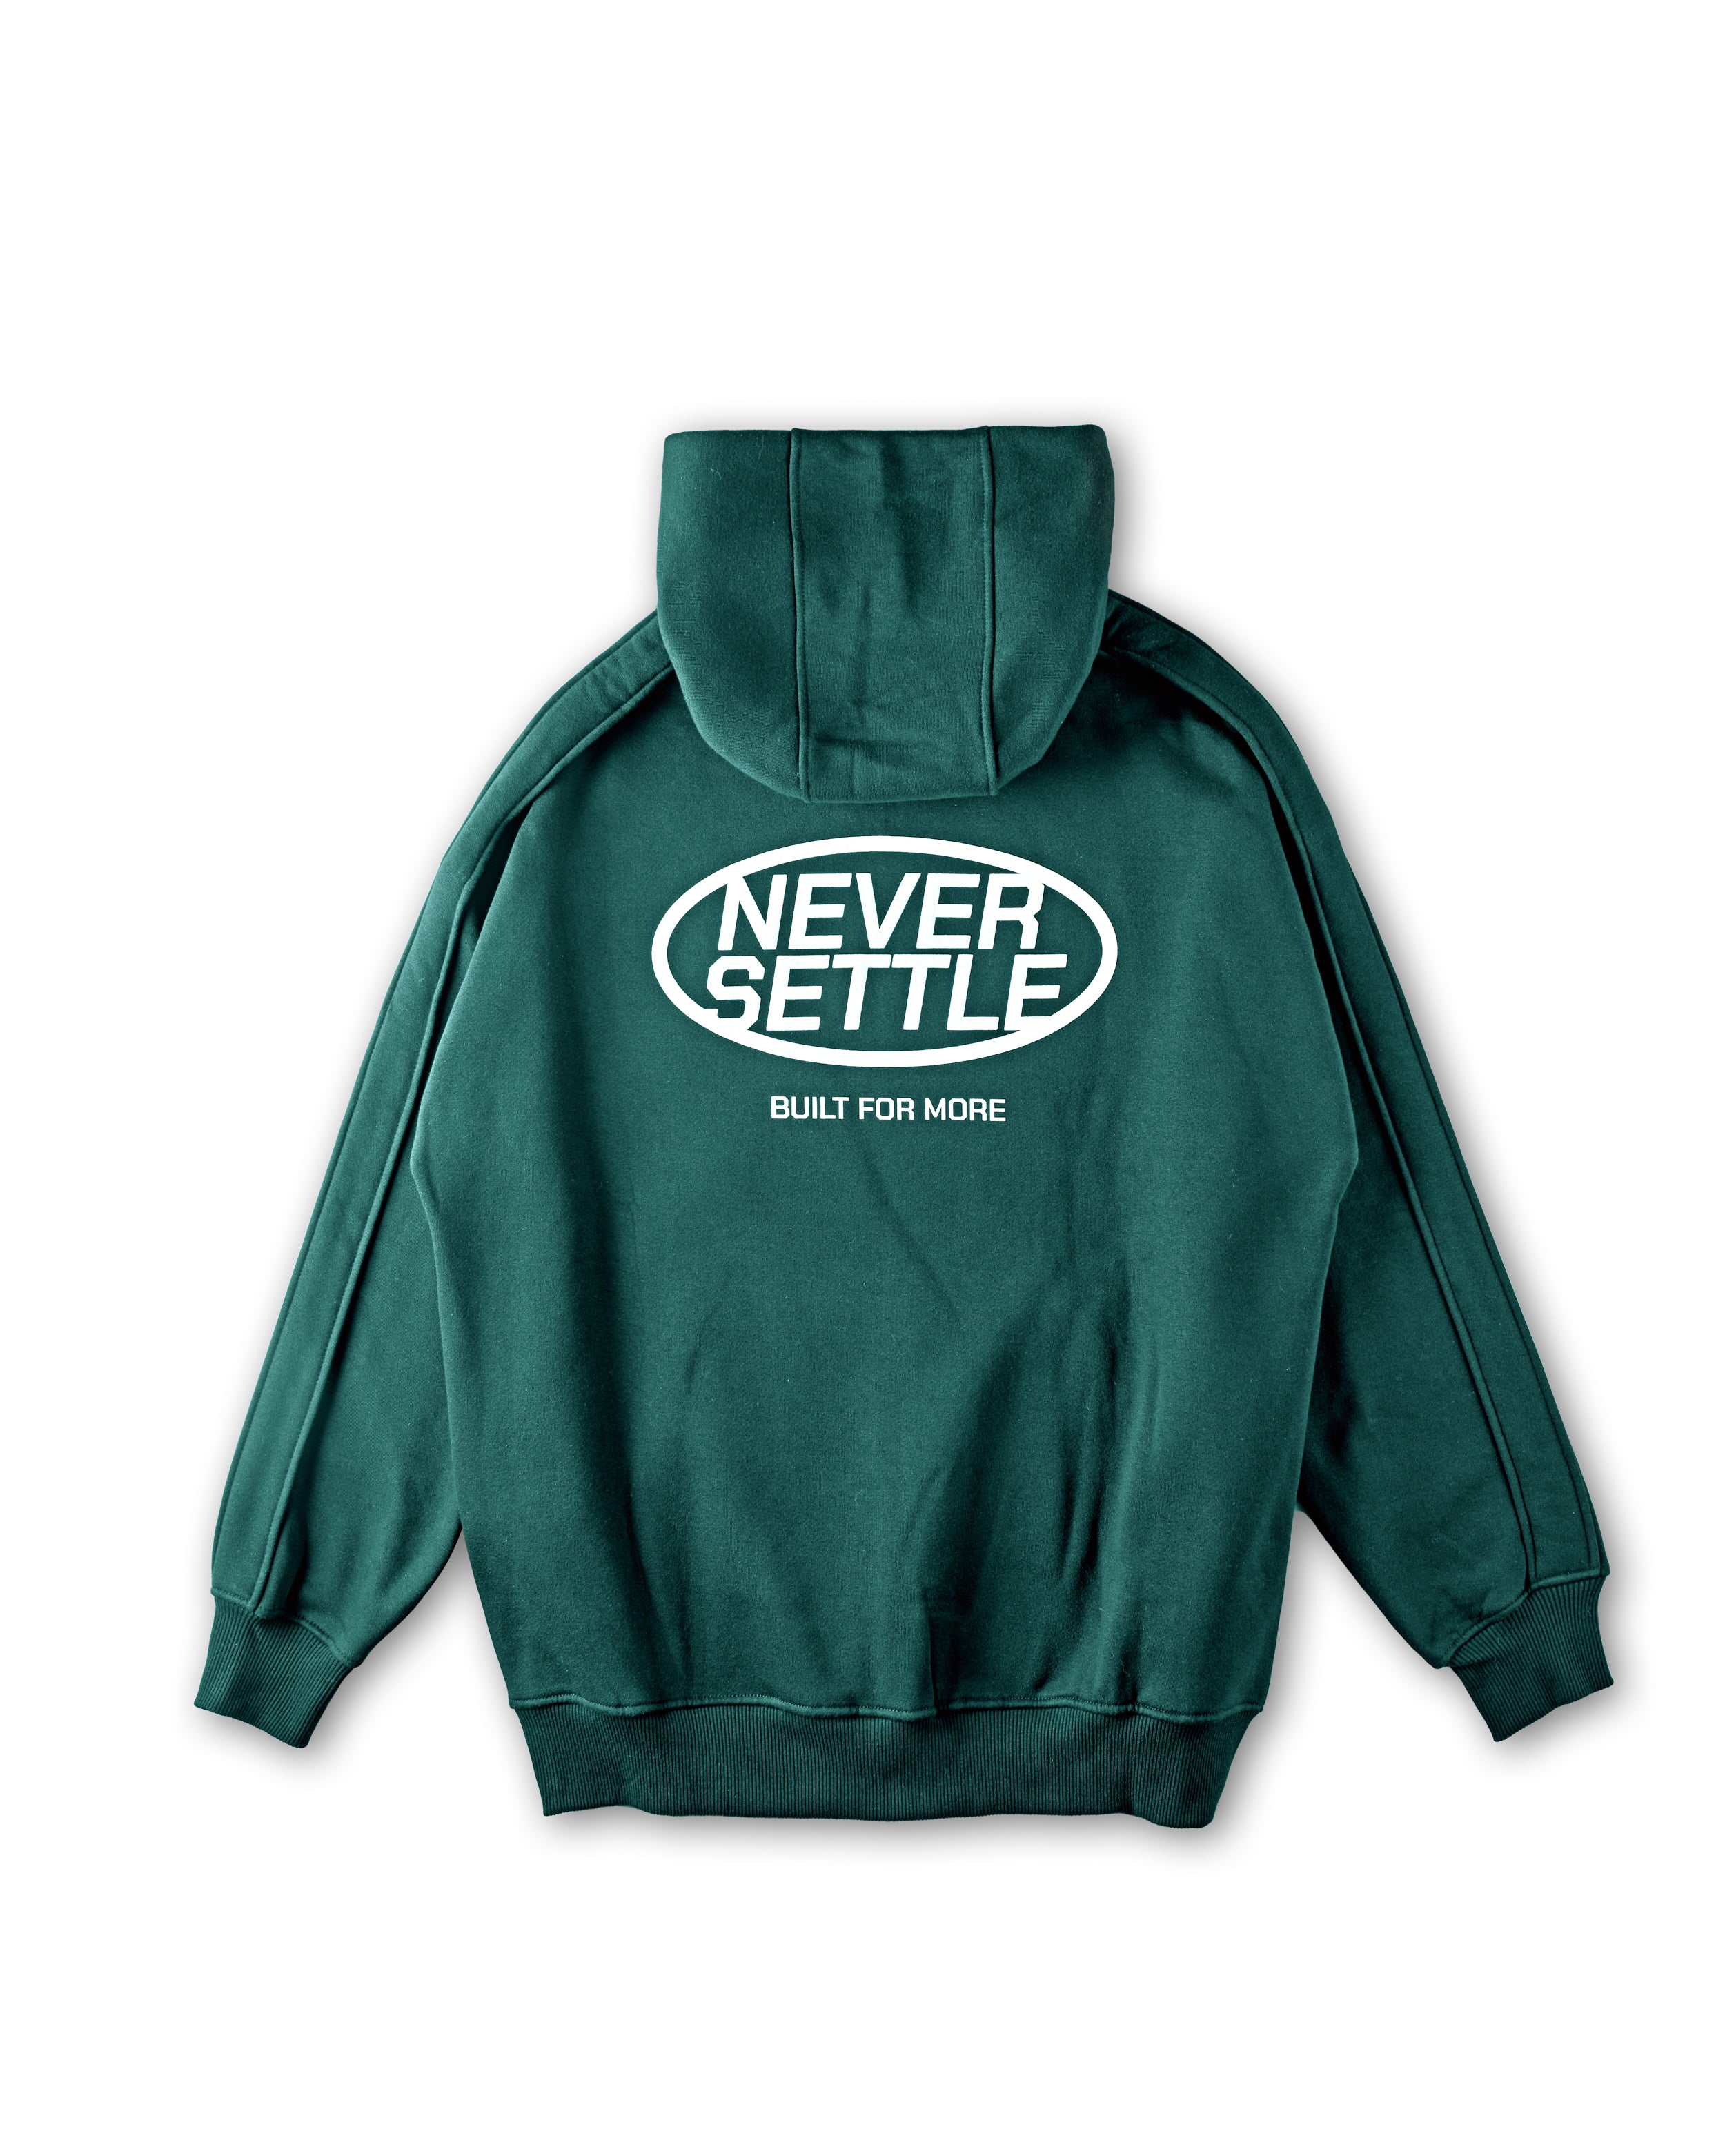 Never Settle Oversized Hoodie - Hoodie - Gym Apparel Egypt